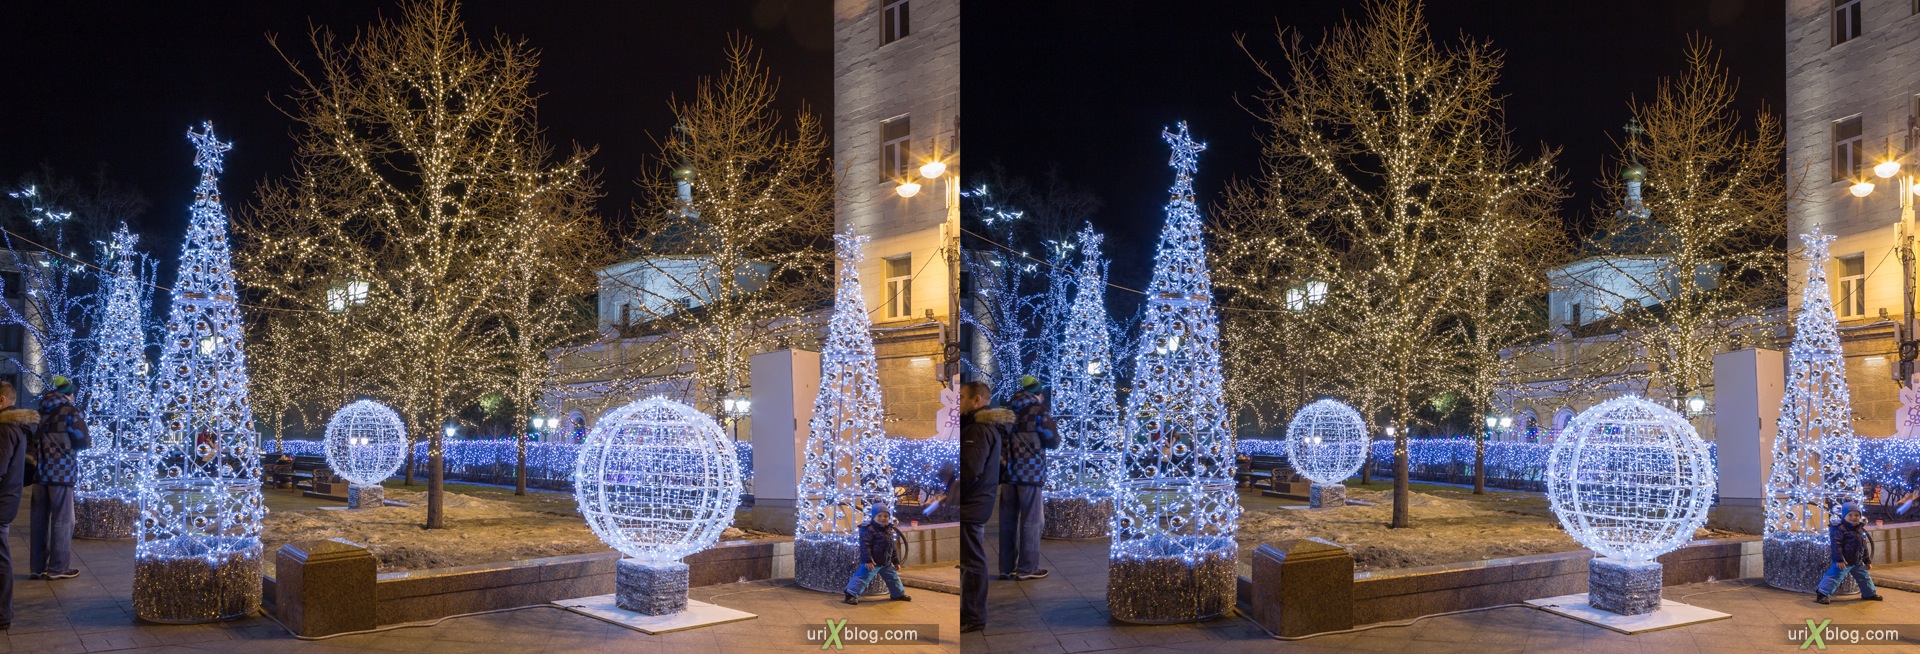 2013, Moscow, Russia, winter, New Year, night, lights, 3D, stereo pair, cross-eyed, crossview, cross view stereo pair, stereoscopic